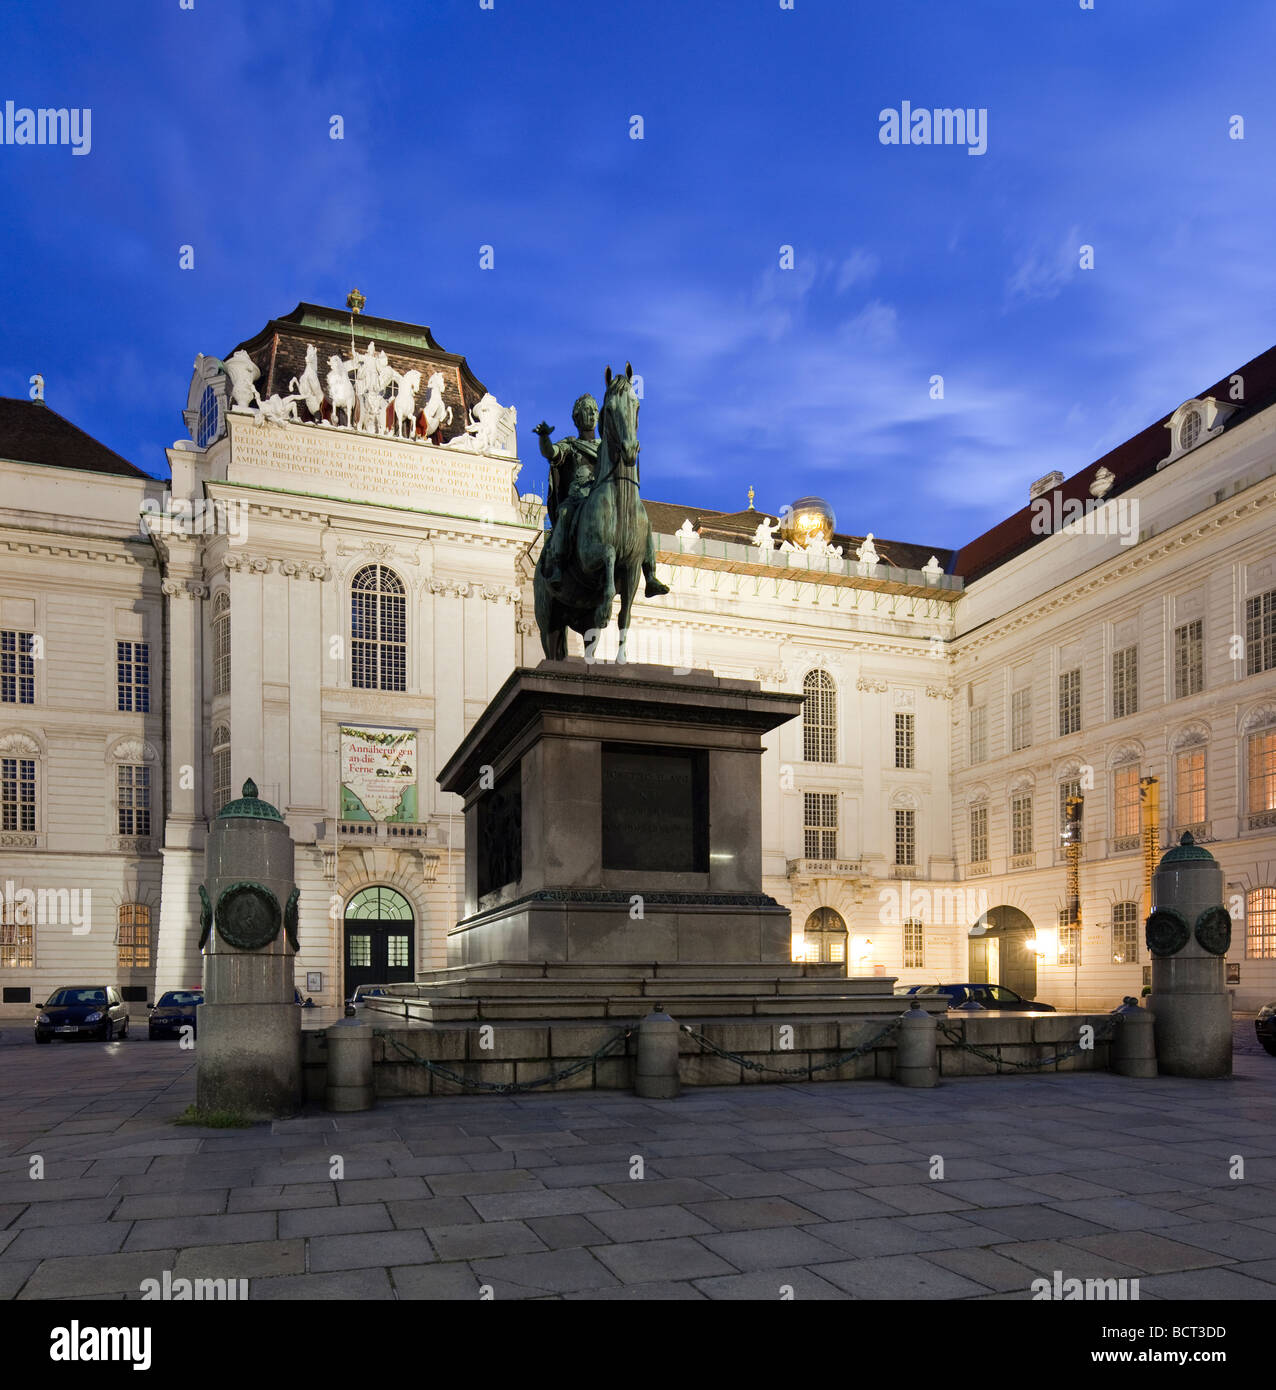 Statue of Josef II and the Prunksaal, Imperial Library, Vienna, Austria Stock Photo